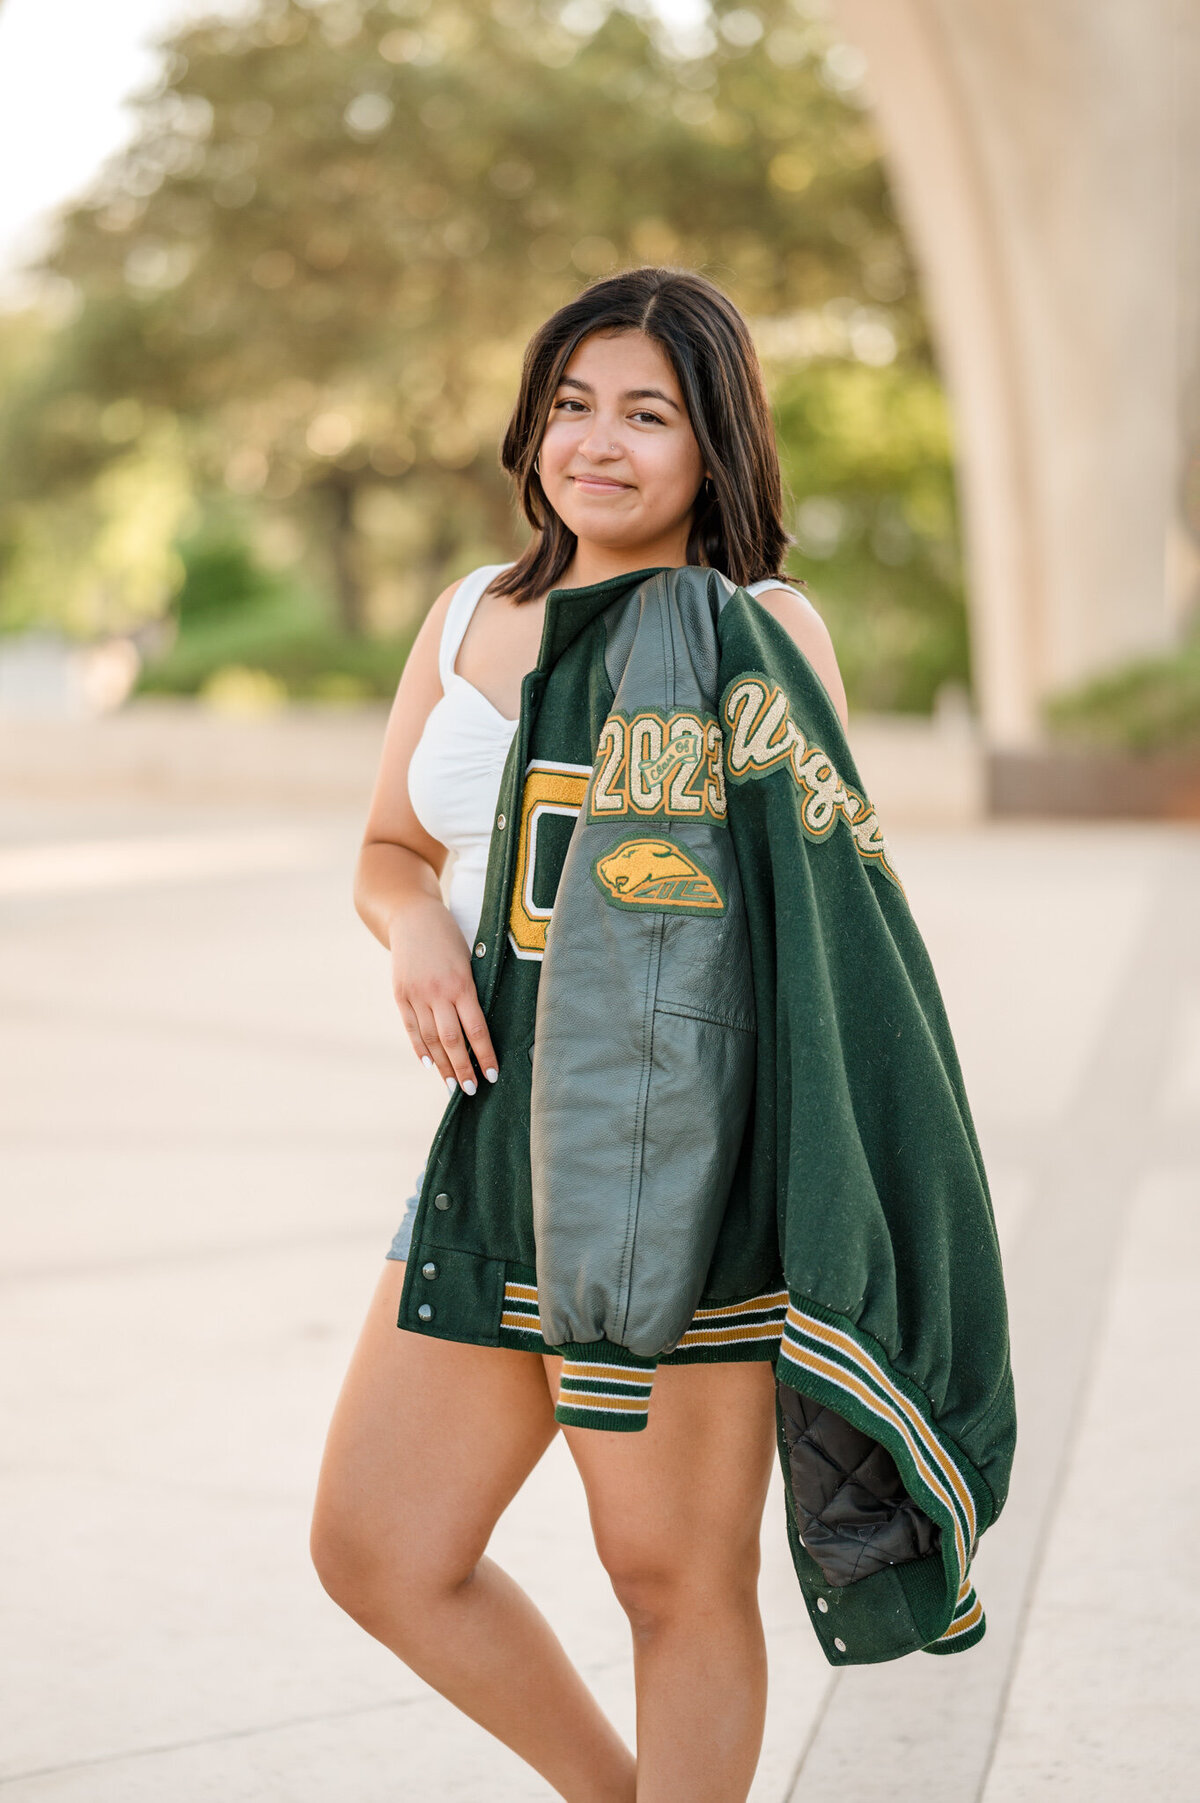 Senior poses with her letterman jacket during pictures.